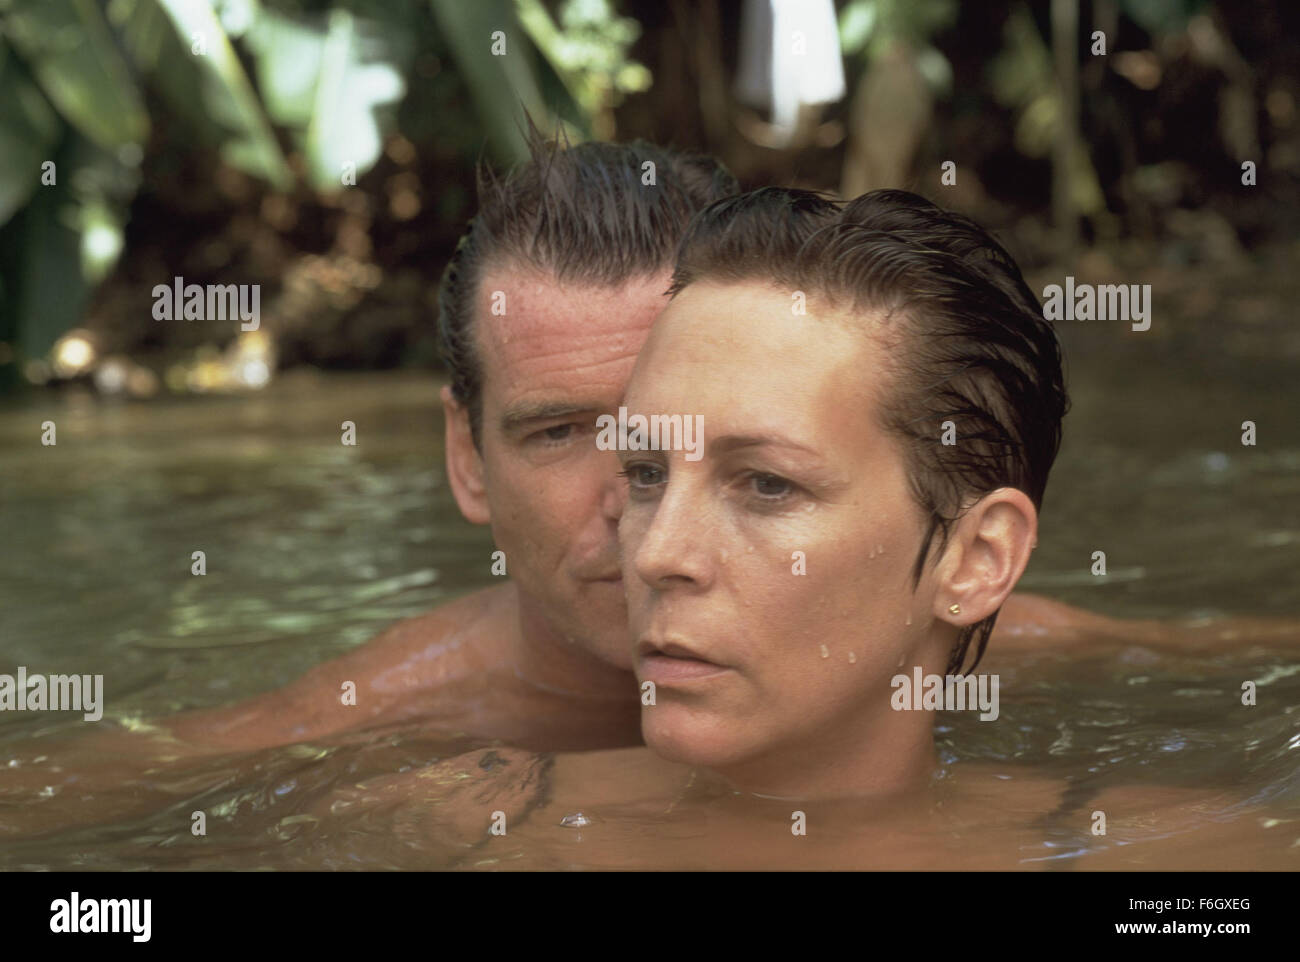 May 06, 2001; Hollywood, CA, USA; Images from John Boorman's 'Tailor of Panama,' starring JAMIE LEE CURTIS as Louisa Pendel, PIERCE BROSNAN as Andrew 'Andy' Osnard. Stock Photo